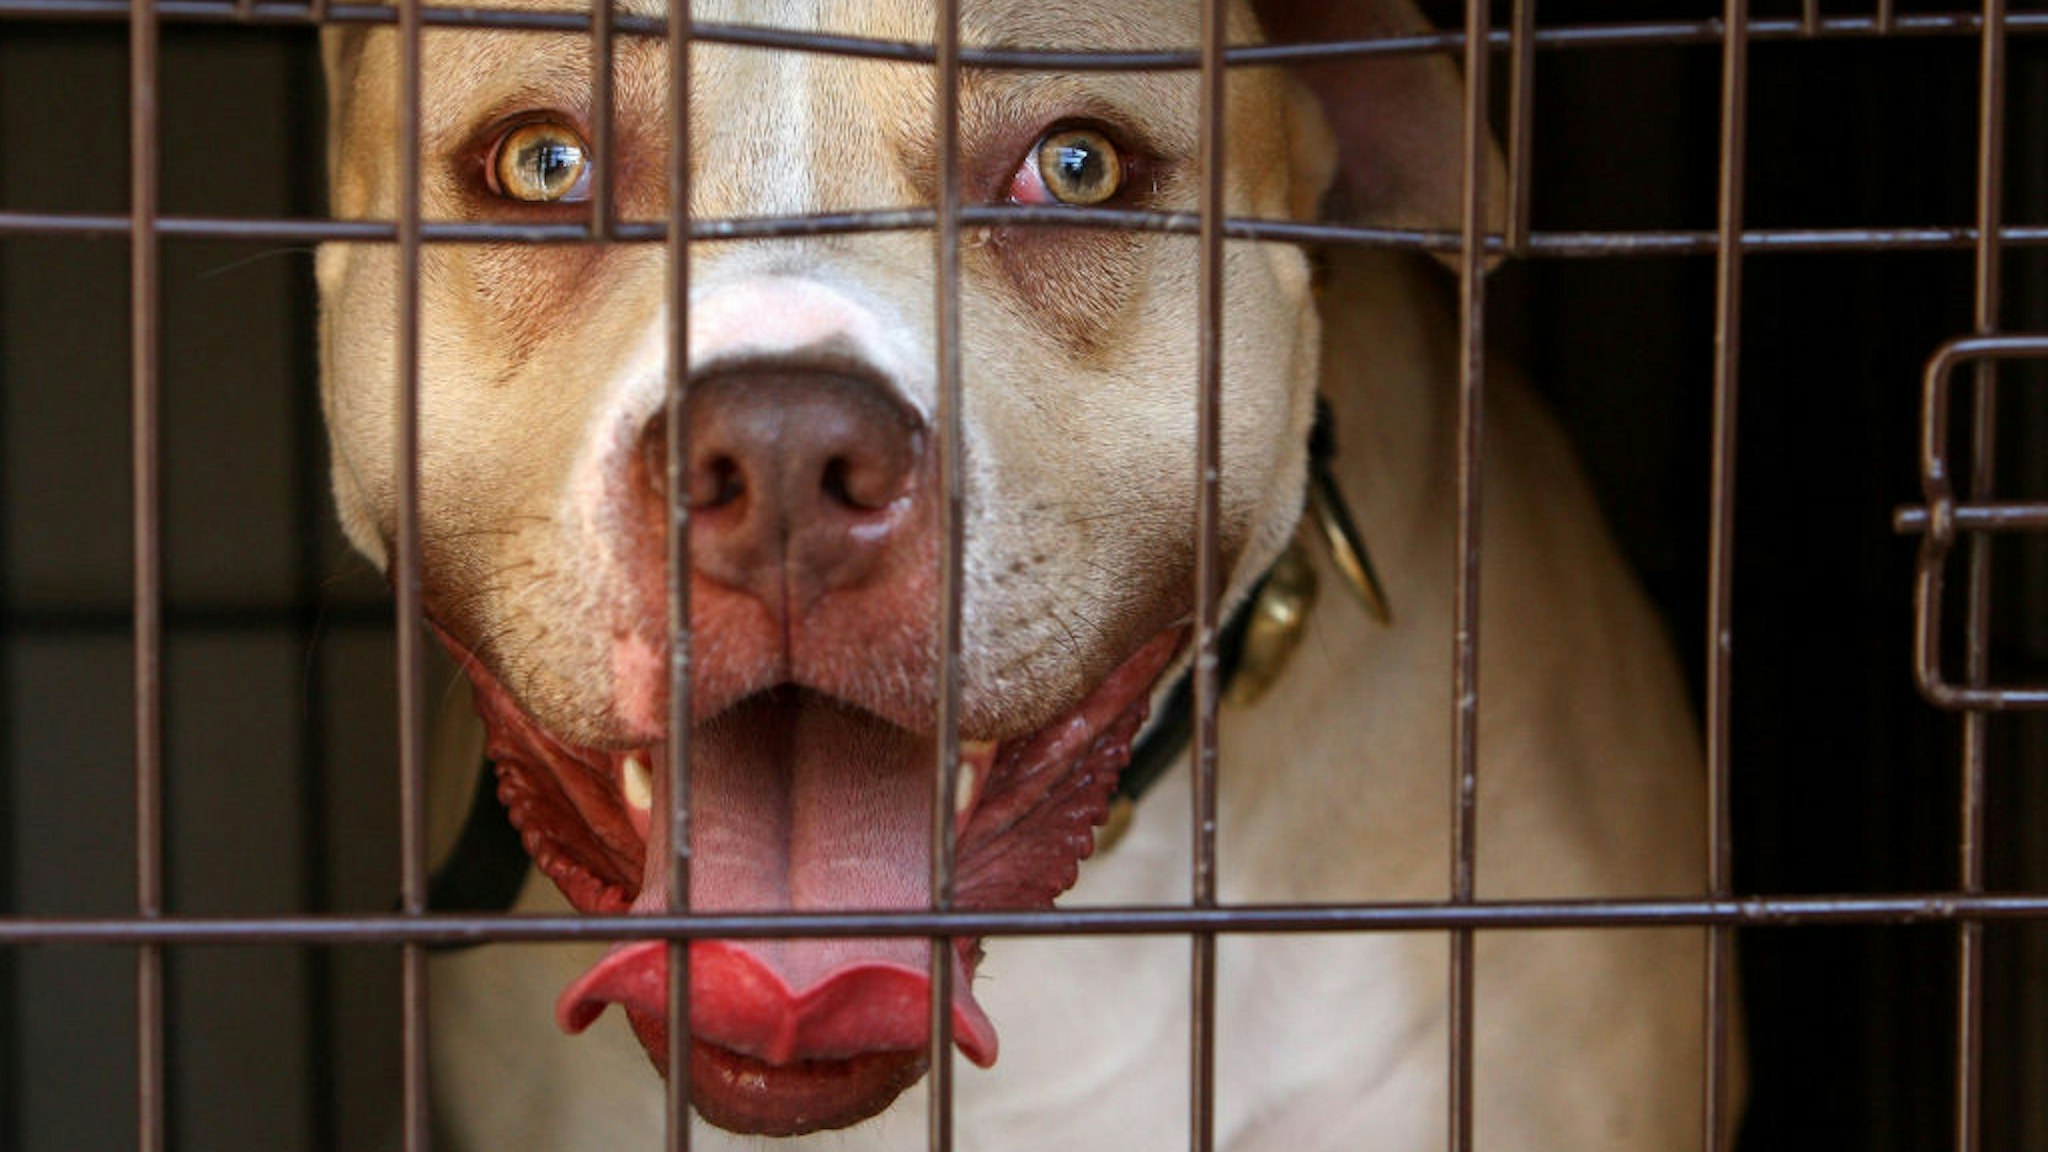 A pitbull seized during a raid on an address in Kennington, south London, as part of operation Navara, targeting dangerous dogs. (Photo by Dominic Lipinski - PA Images/PA Images via Getty Images)